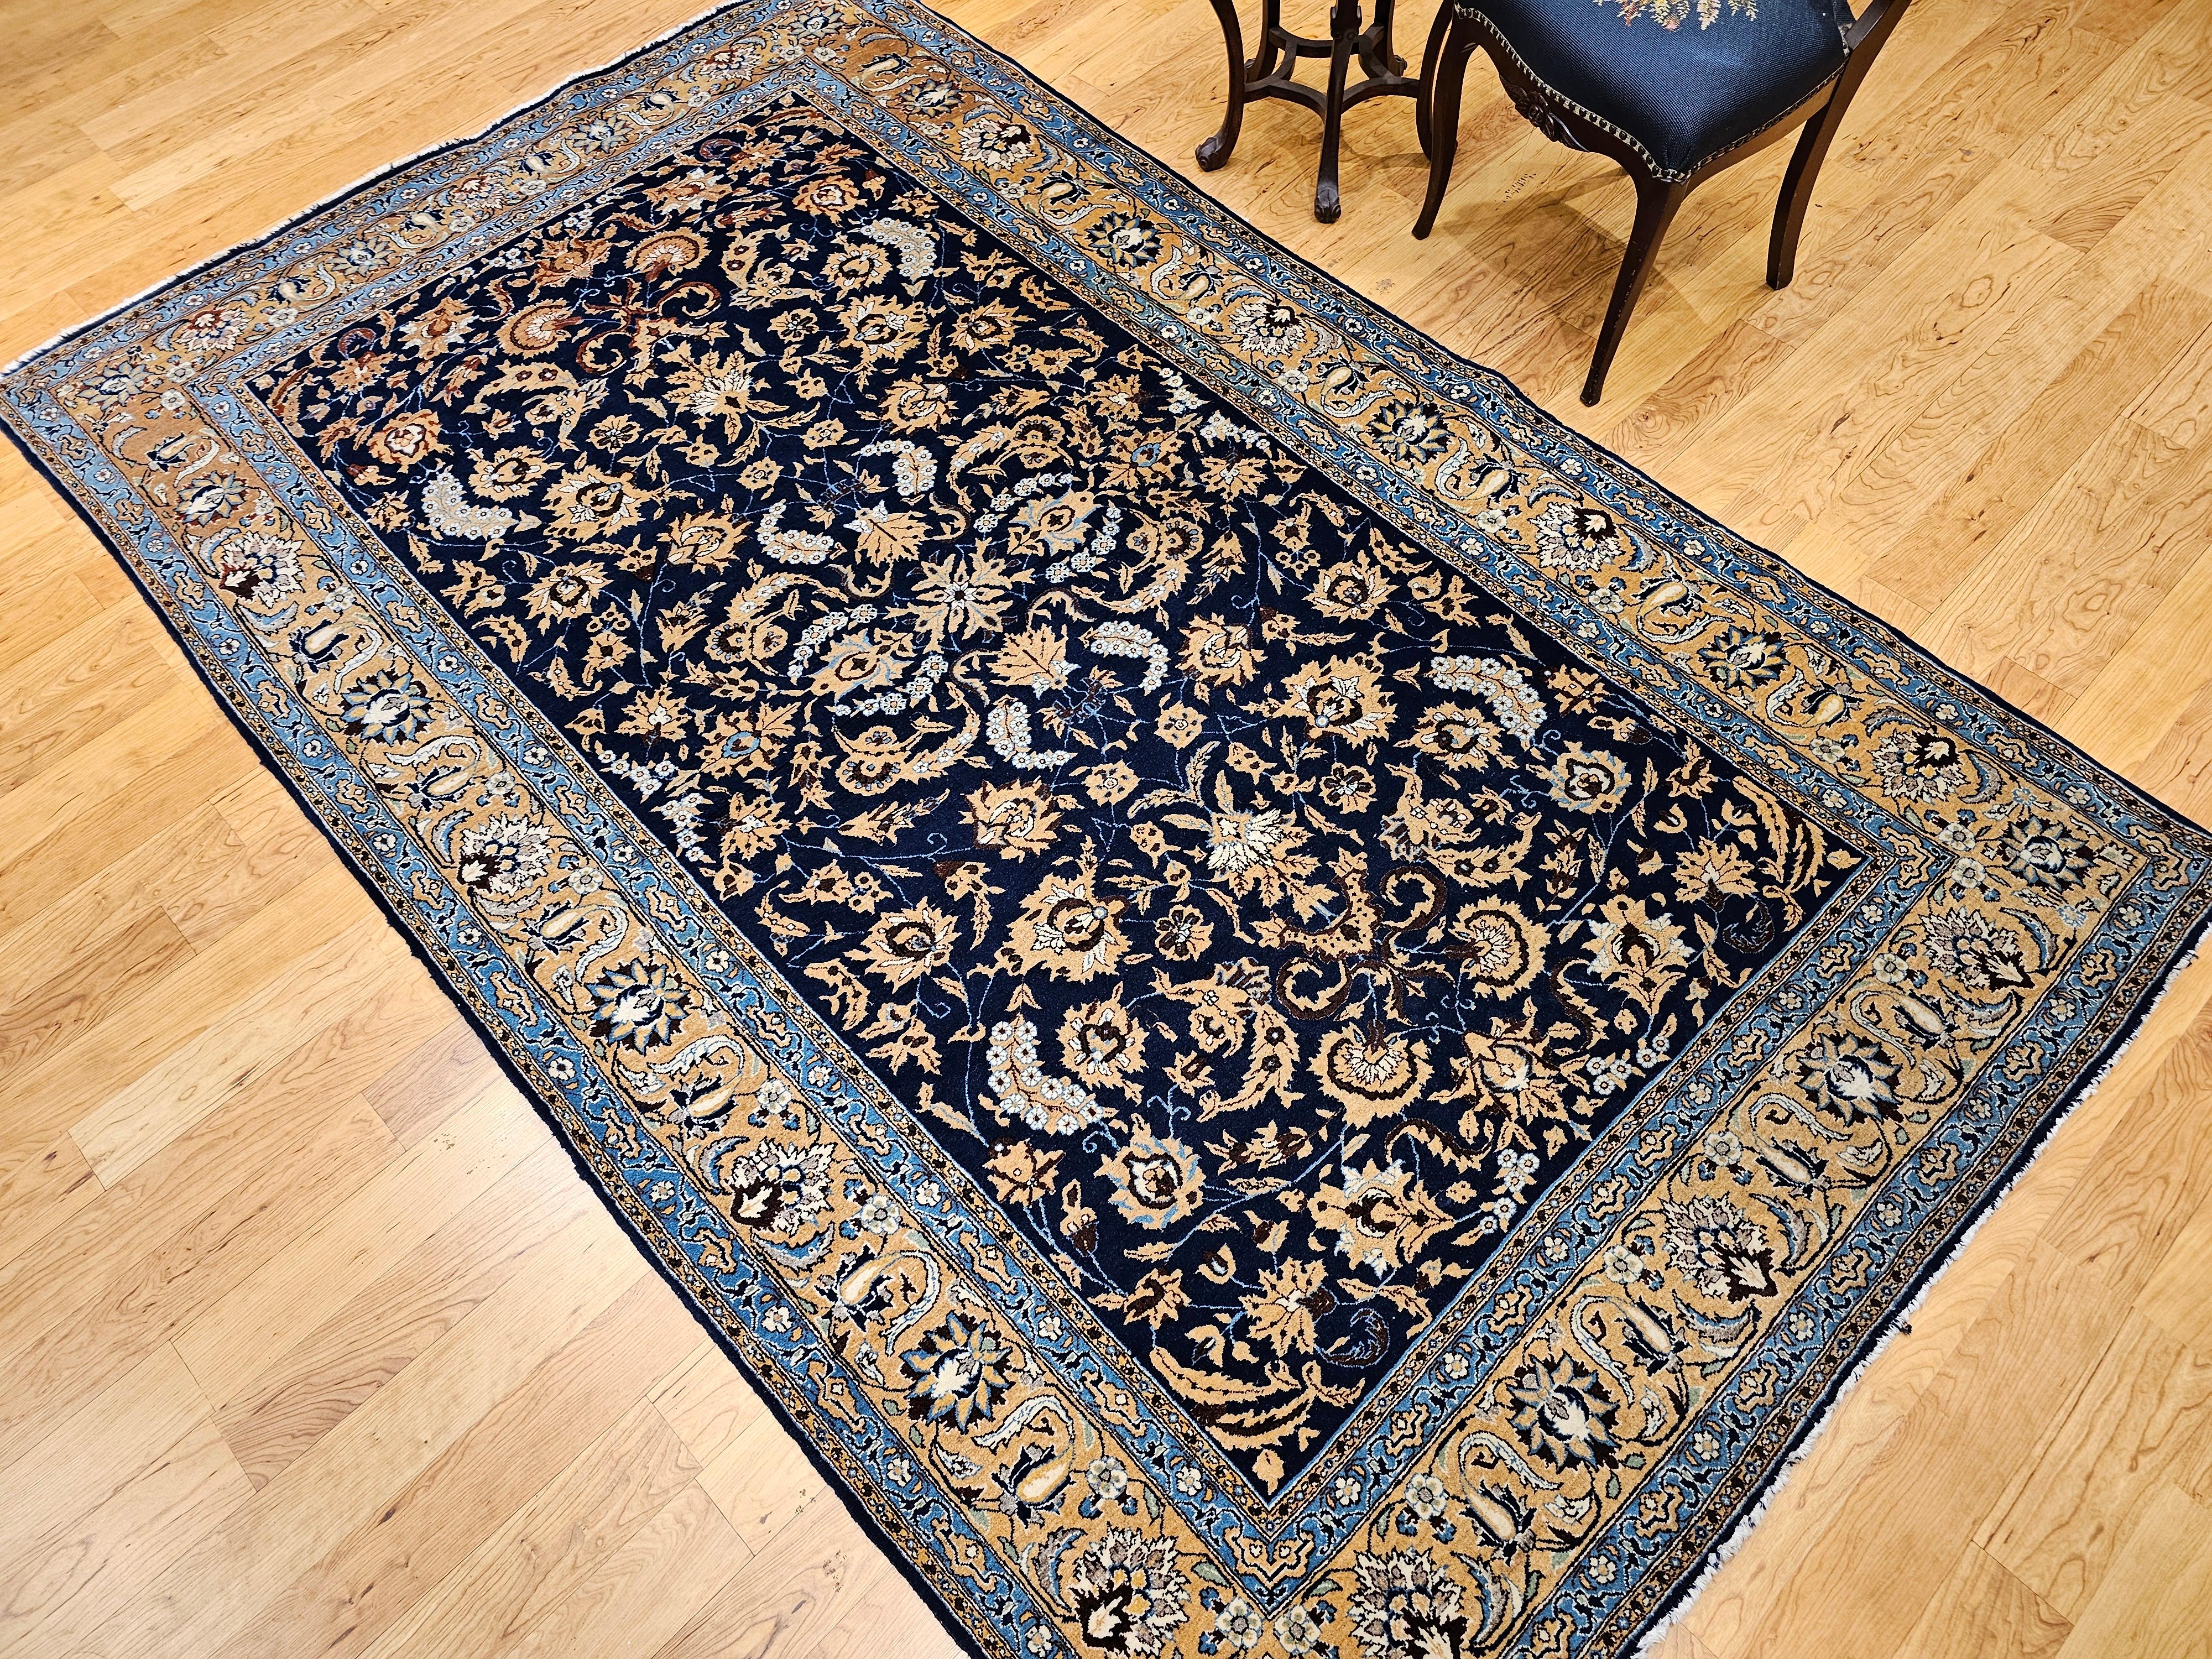 Vintage Persian Tabriz in an Allover Pattern in Navy Blue, Tan, Brown, Baby Blue For Sale 5